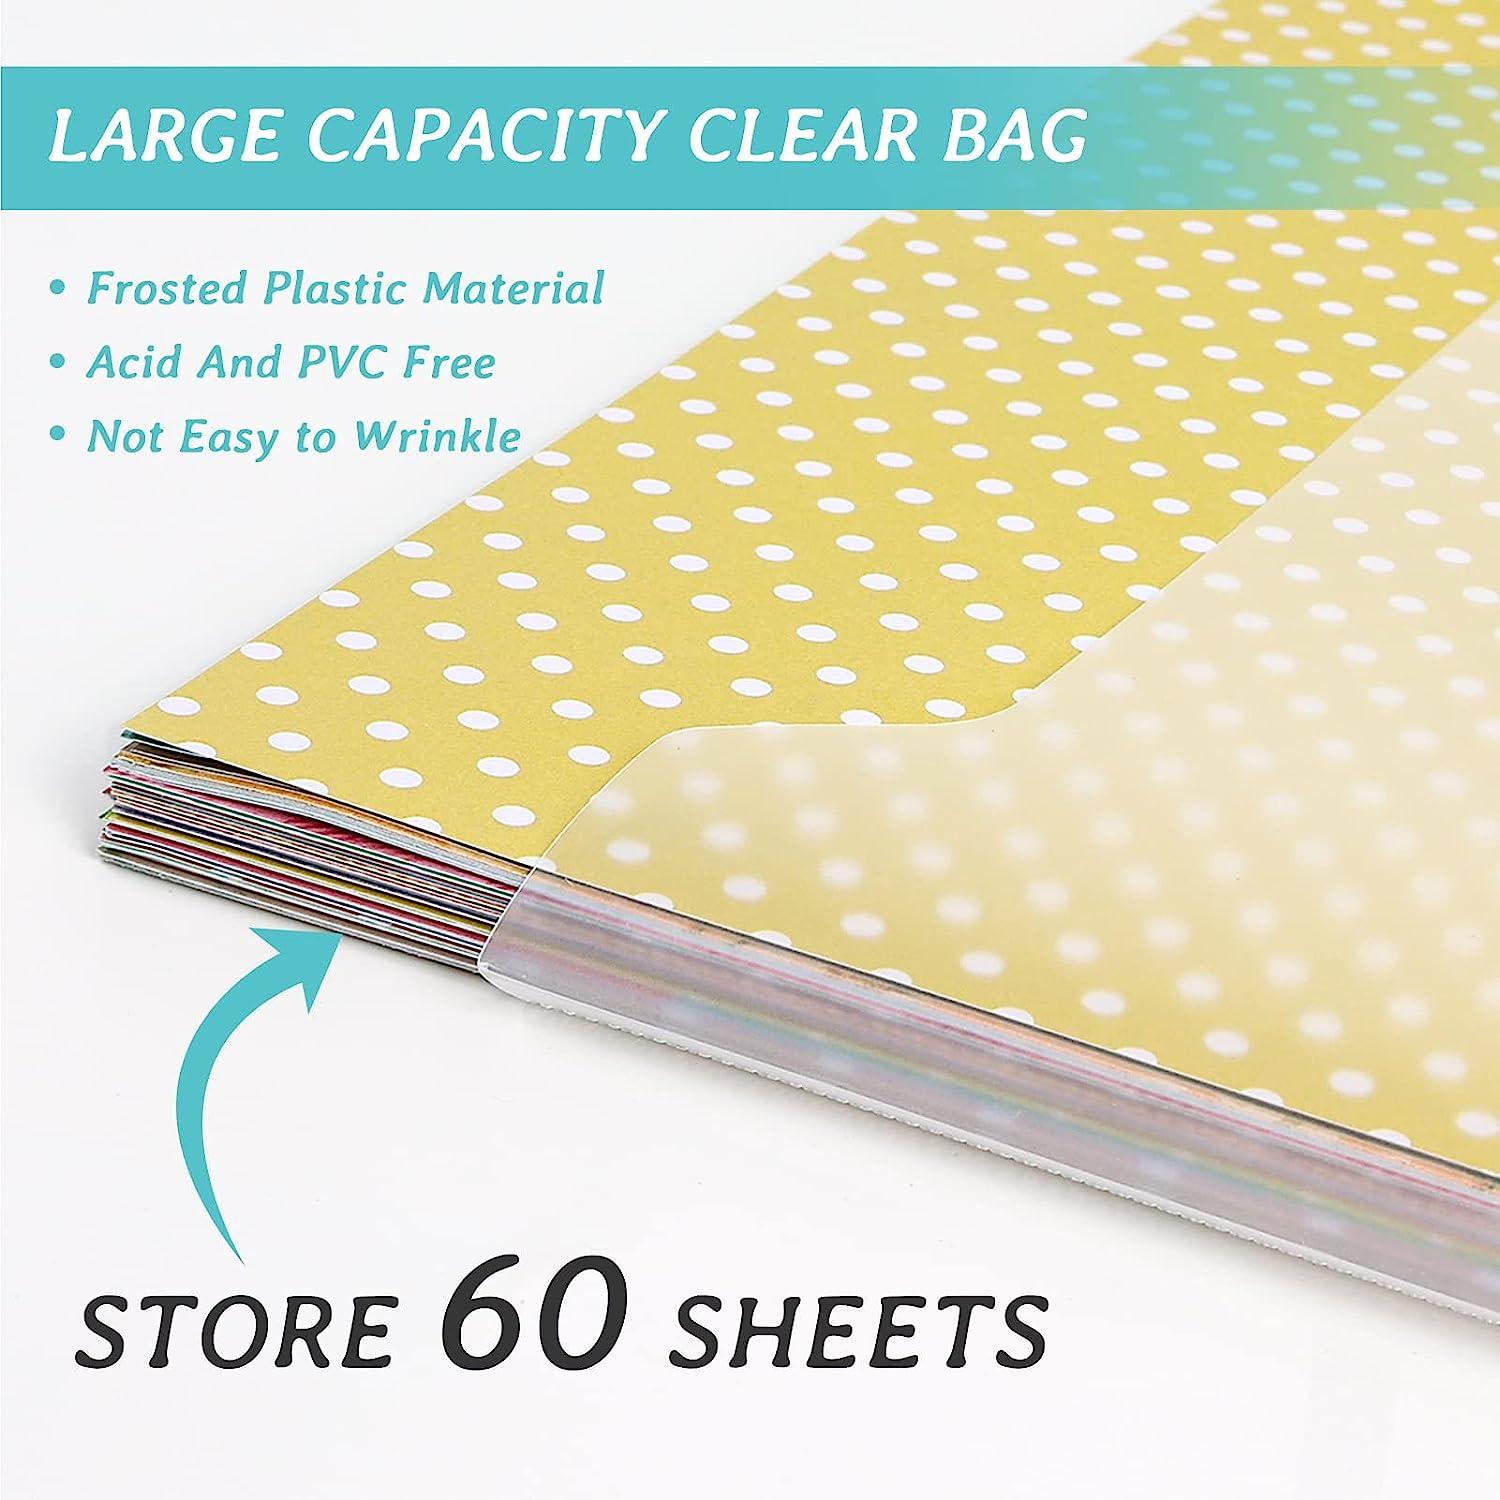 Caydo 20 Pieces Scrapbook Paper Storage Clear 12 x 12 Paper Storage  Organizer with Tabs and Gusset Bottom for Holding Scrapbook Paper, Vinyl  Paper